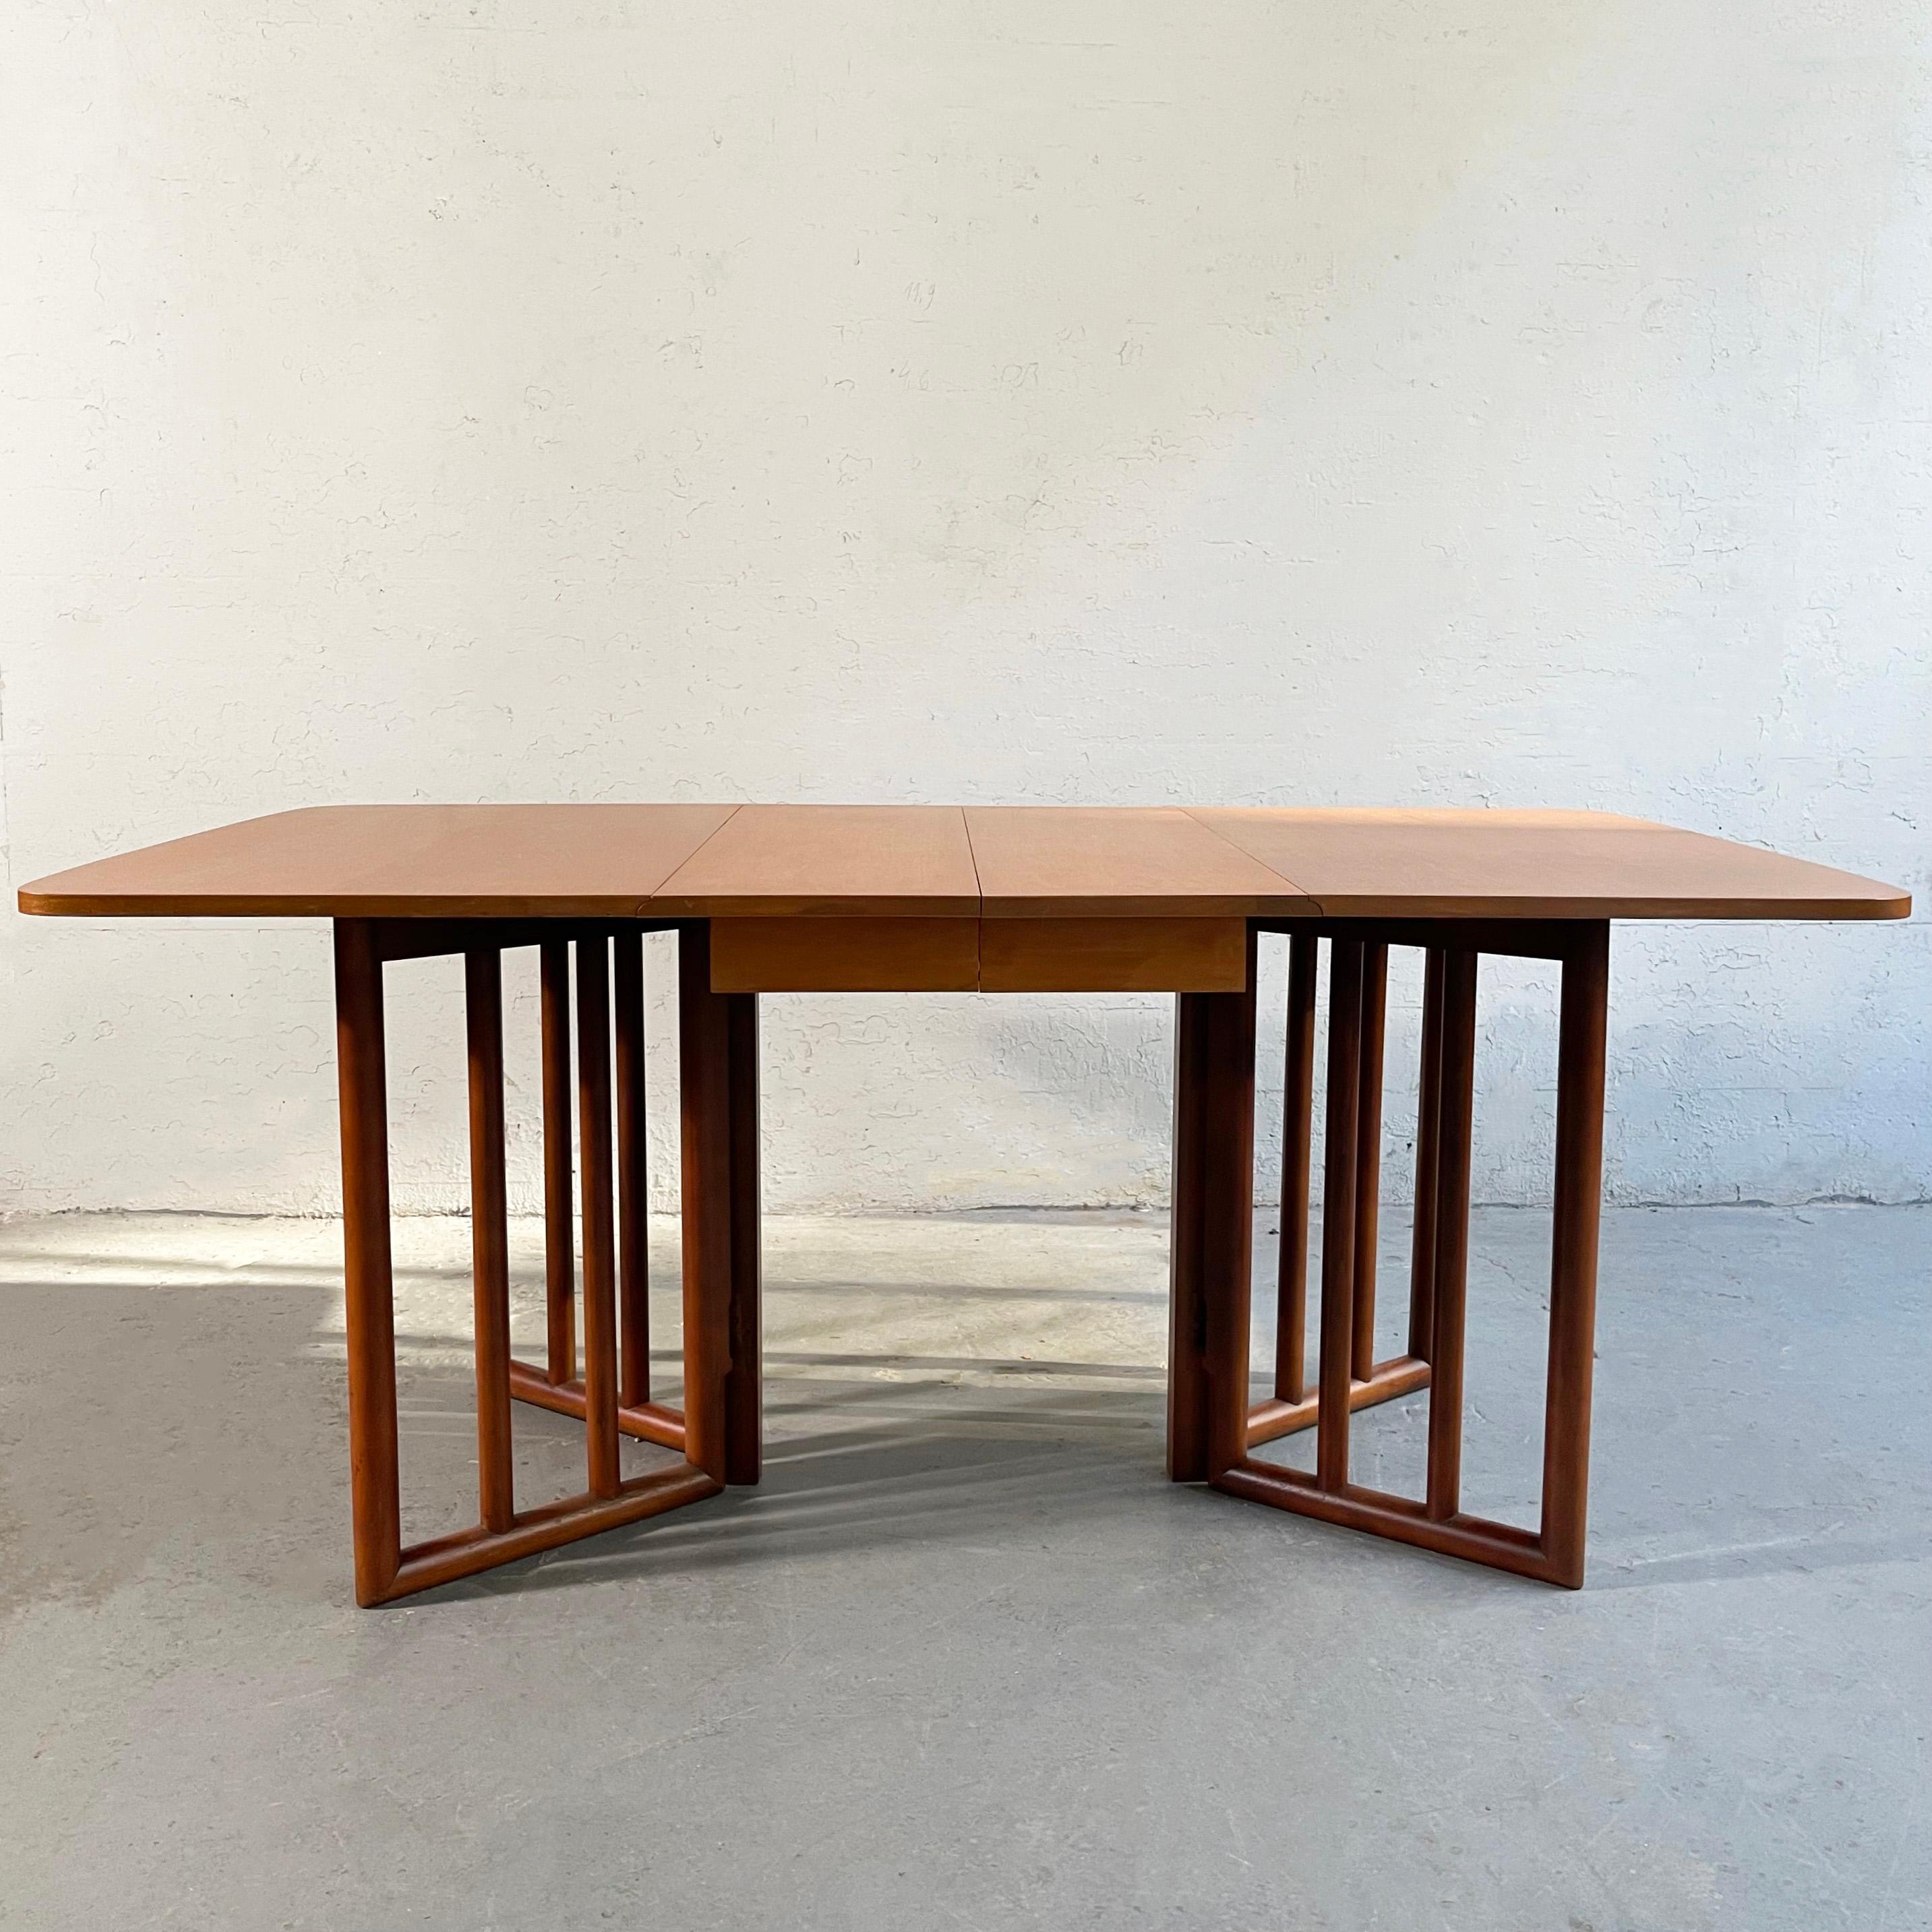 Mid-Century Modern, birch, drop leaf dining table attributed to T.H. Robsjohn Gibbings feautures an architectural, columnar, gate leg base. This versatile table can also be used with one leaf up and folds down completely to a 38 x 25.5 inch deep